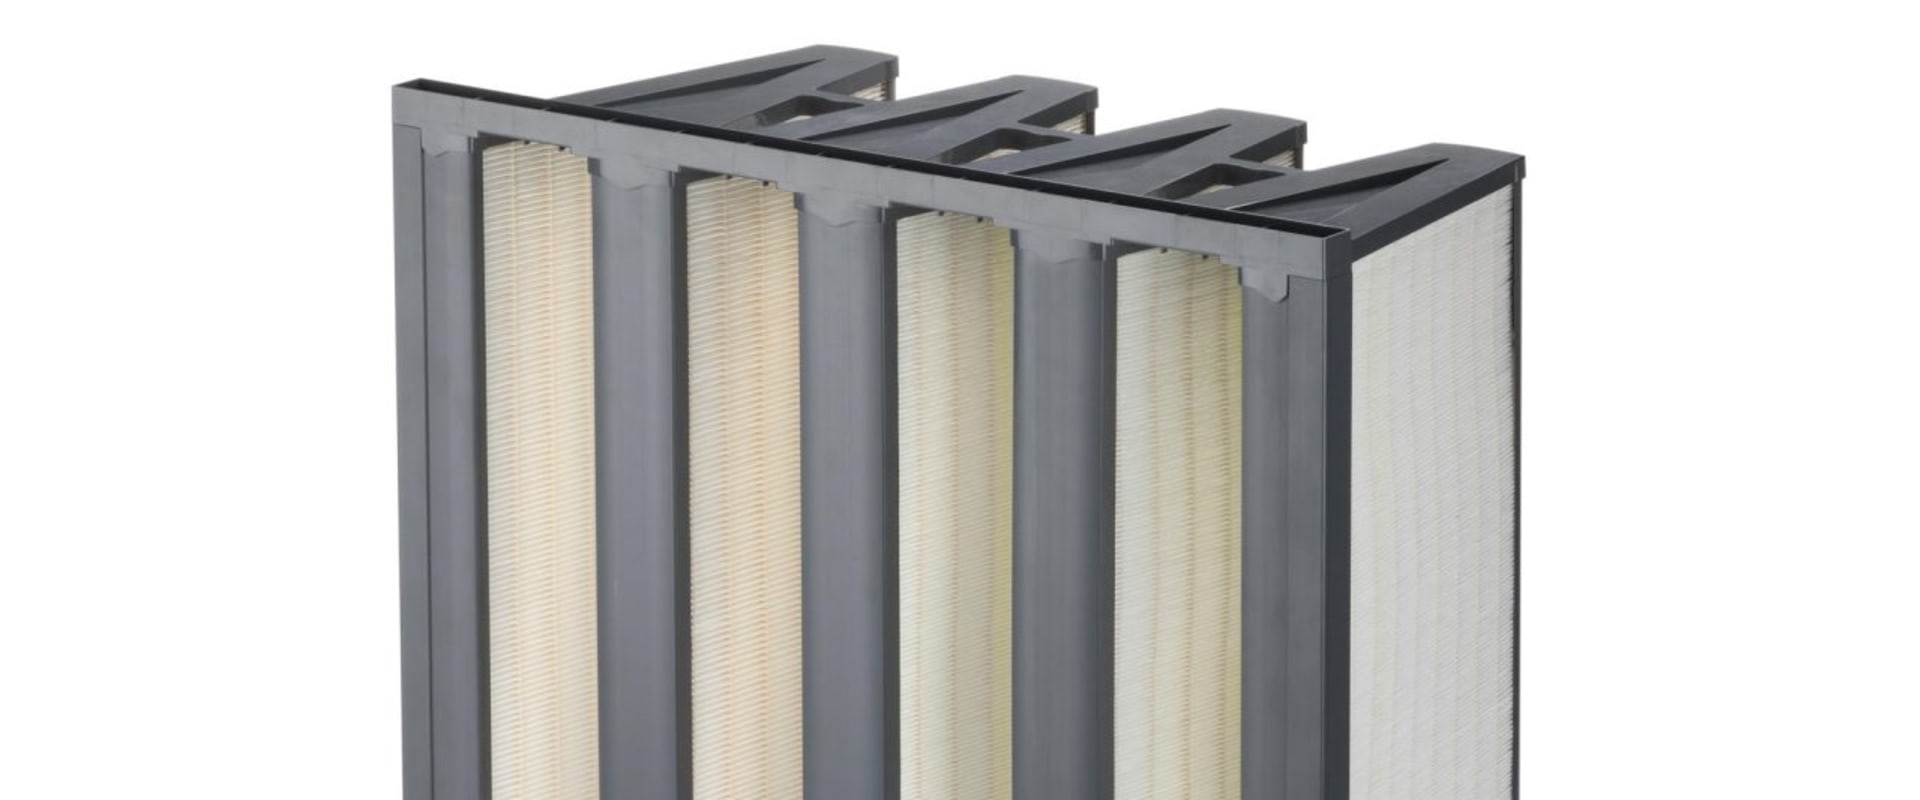 Maximize Energy Savings with the Right Furnace Filters